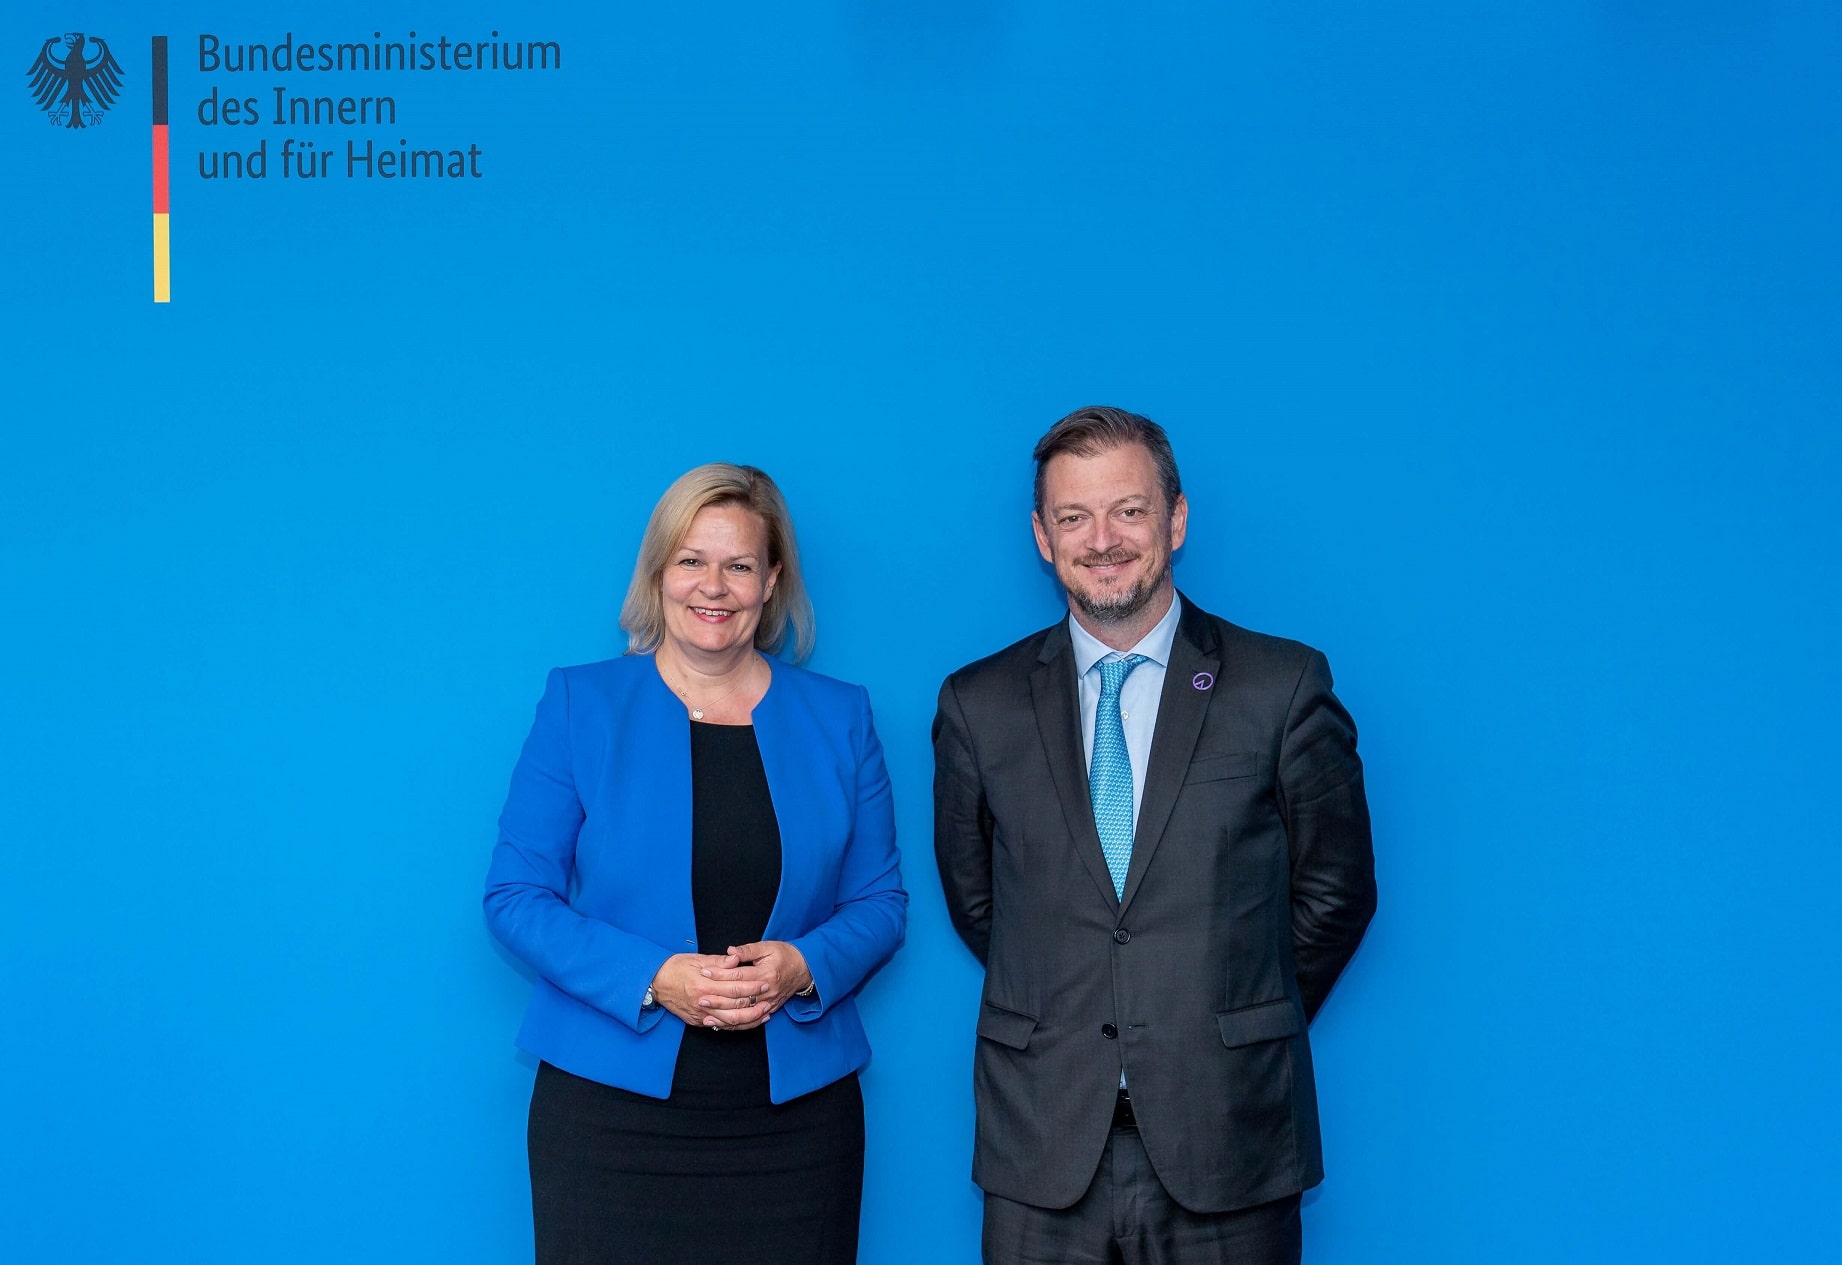 IPC President meets German federal minister of Interior and Community